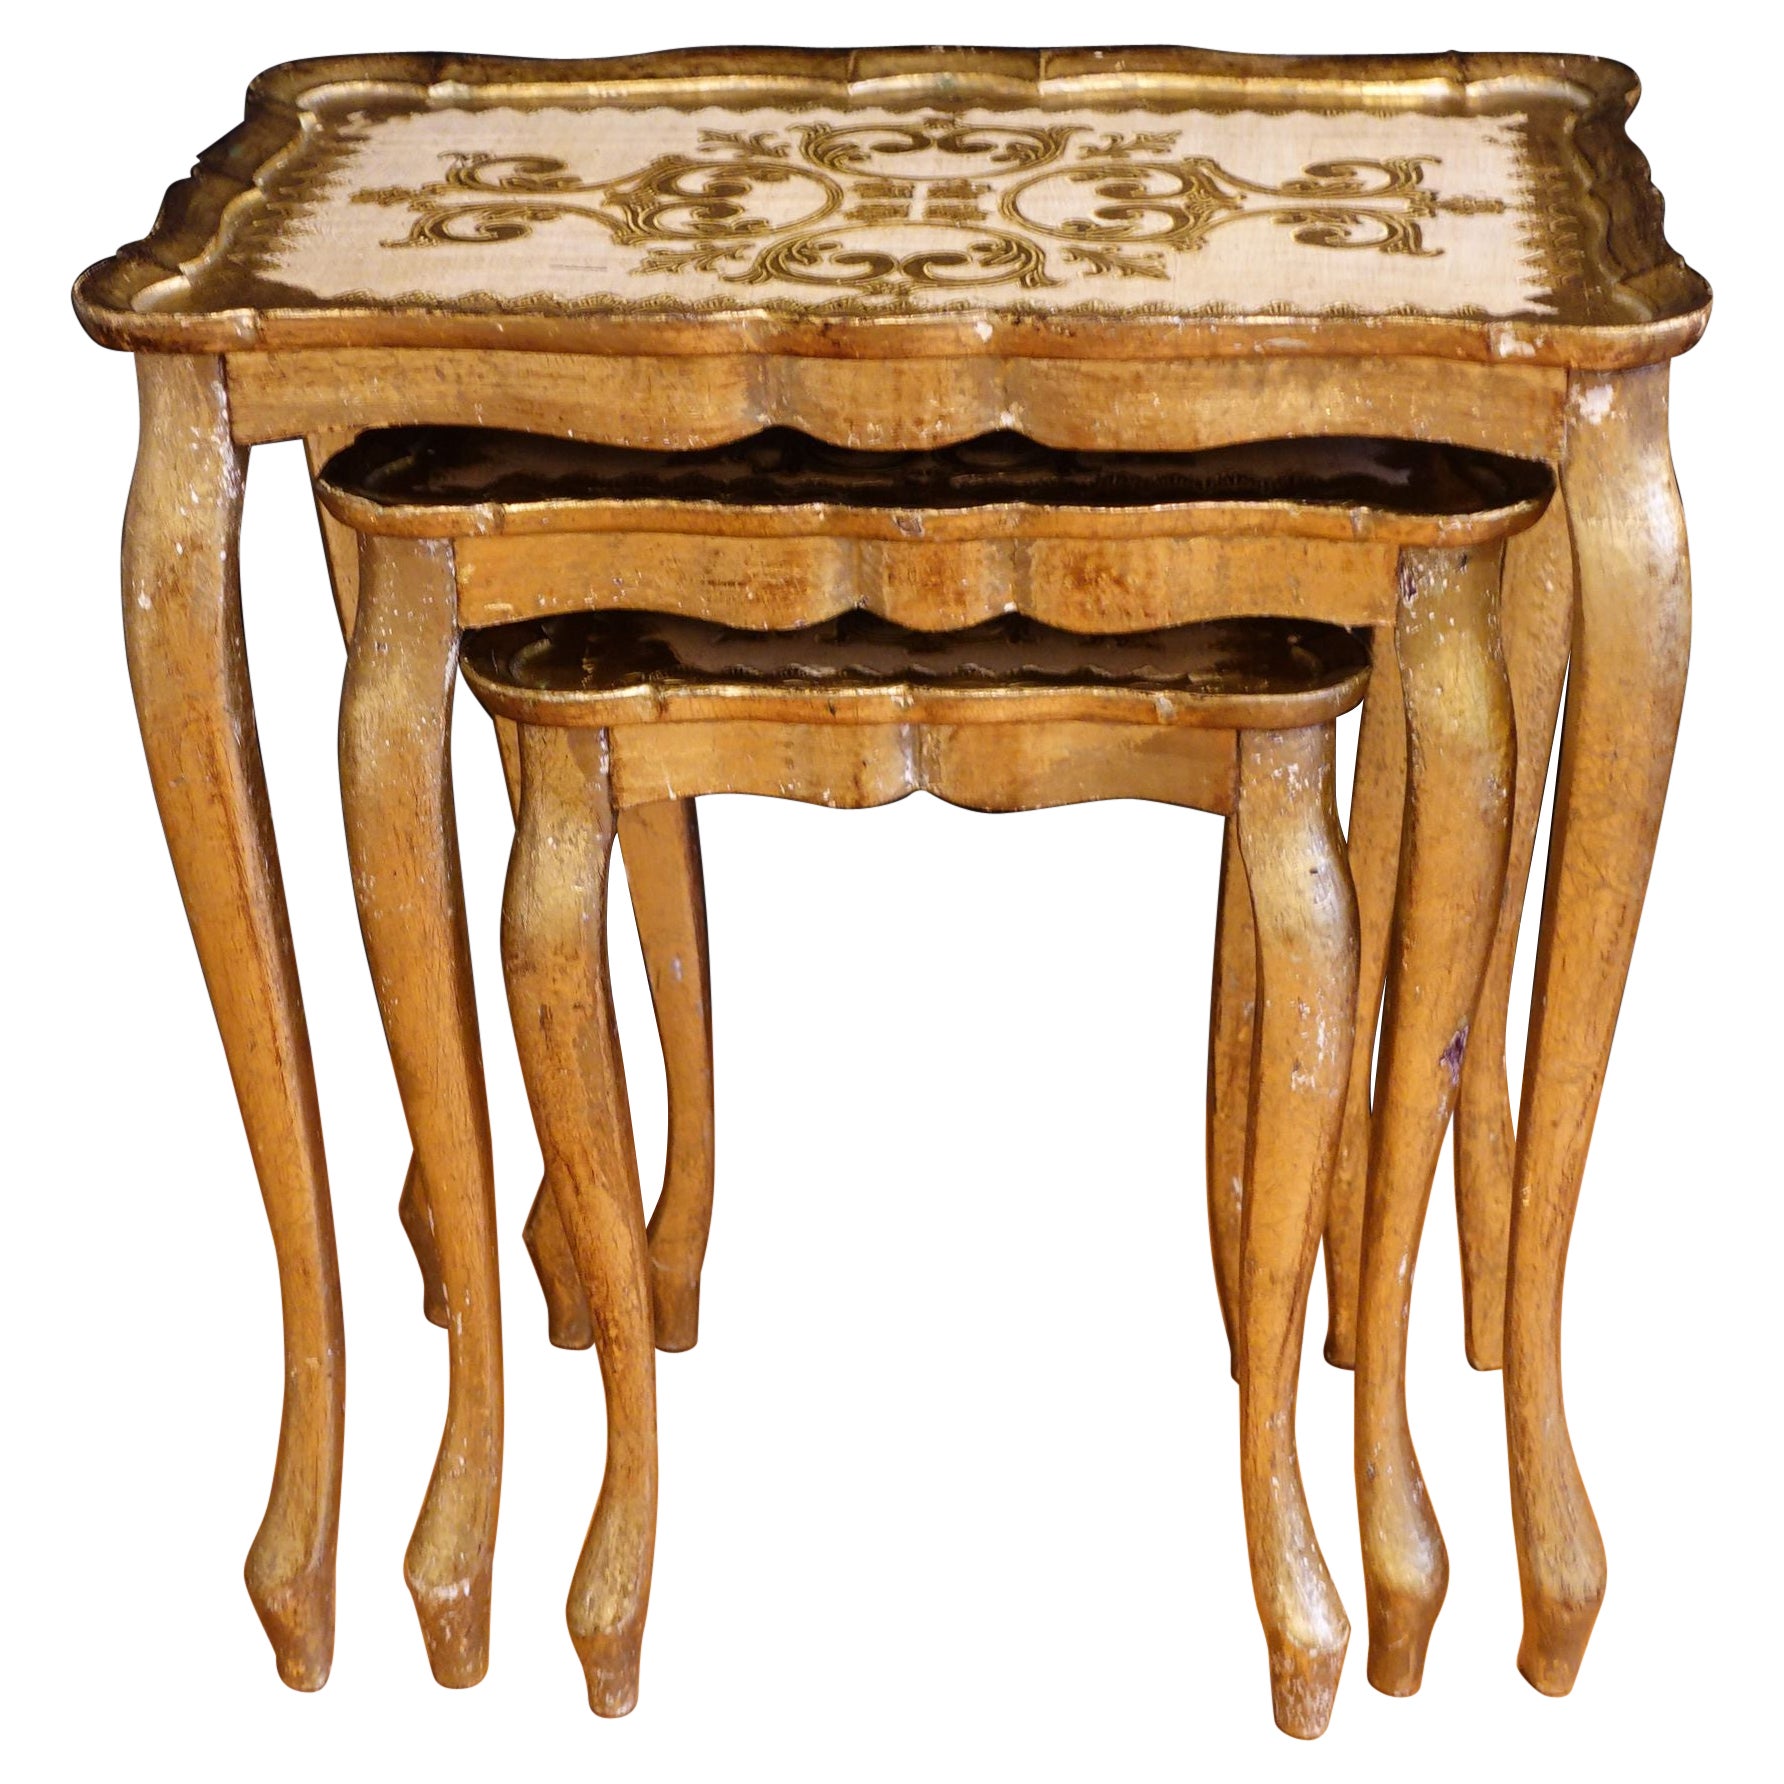 Gilded Wood Florentine Hollywood Regency Style Tole Set of Three Nesting Tables